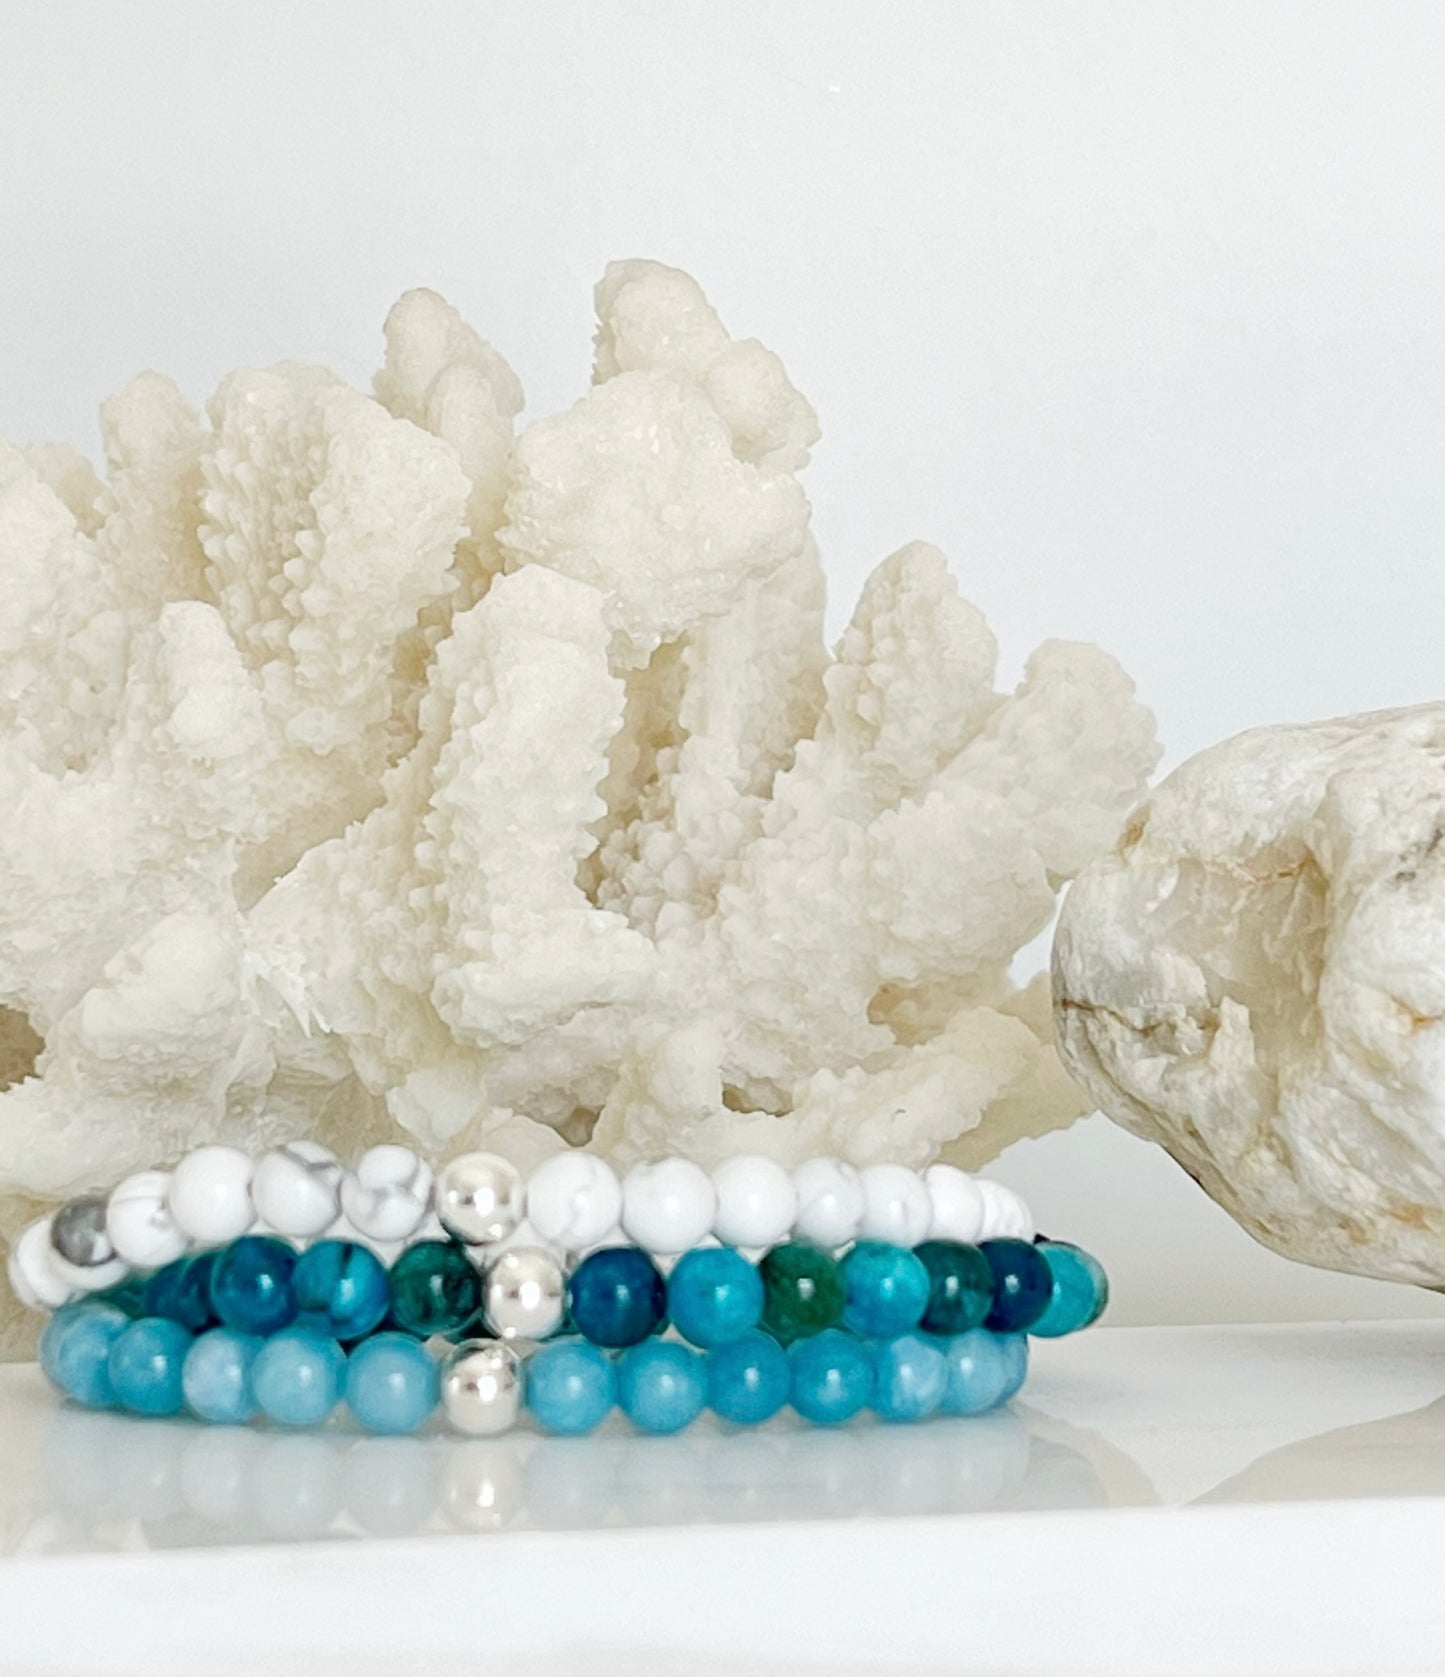 Three stretch bracelets stacked on top of each other in front of white coral and a brownish rock. The stretch bracelets are white, turquoise like ocean waves and light blue